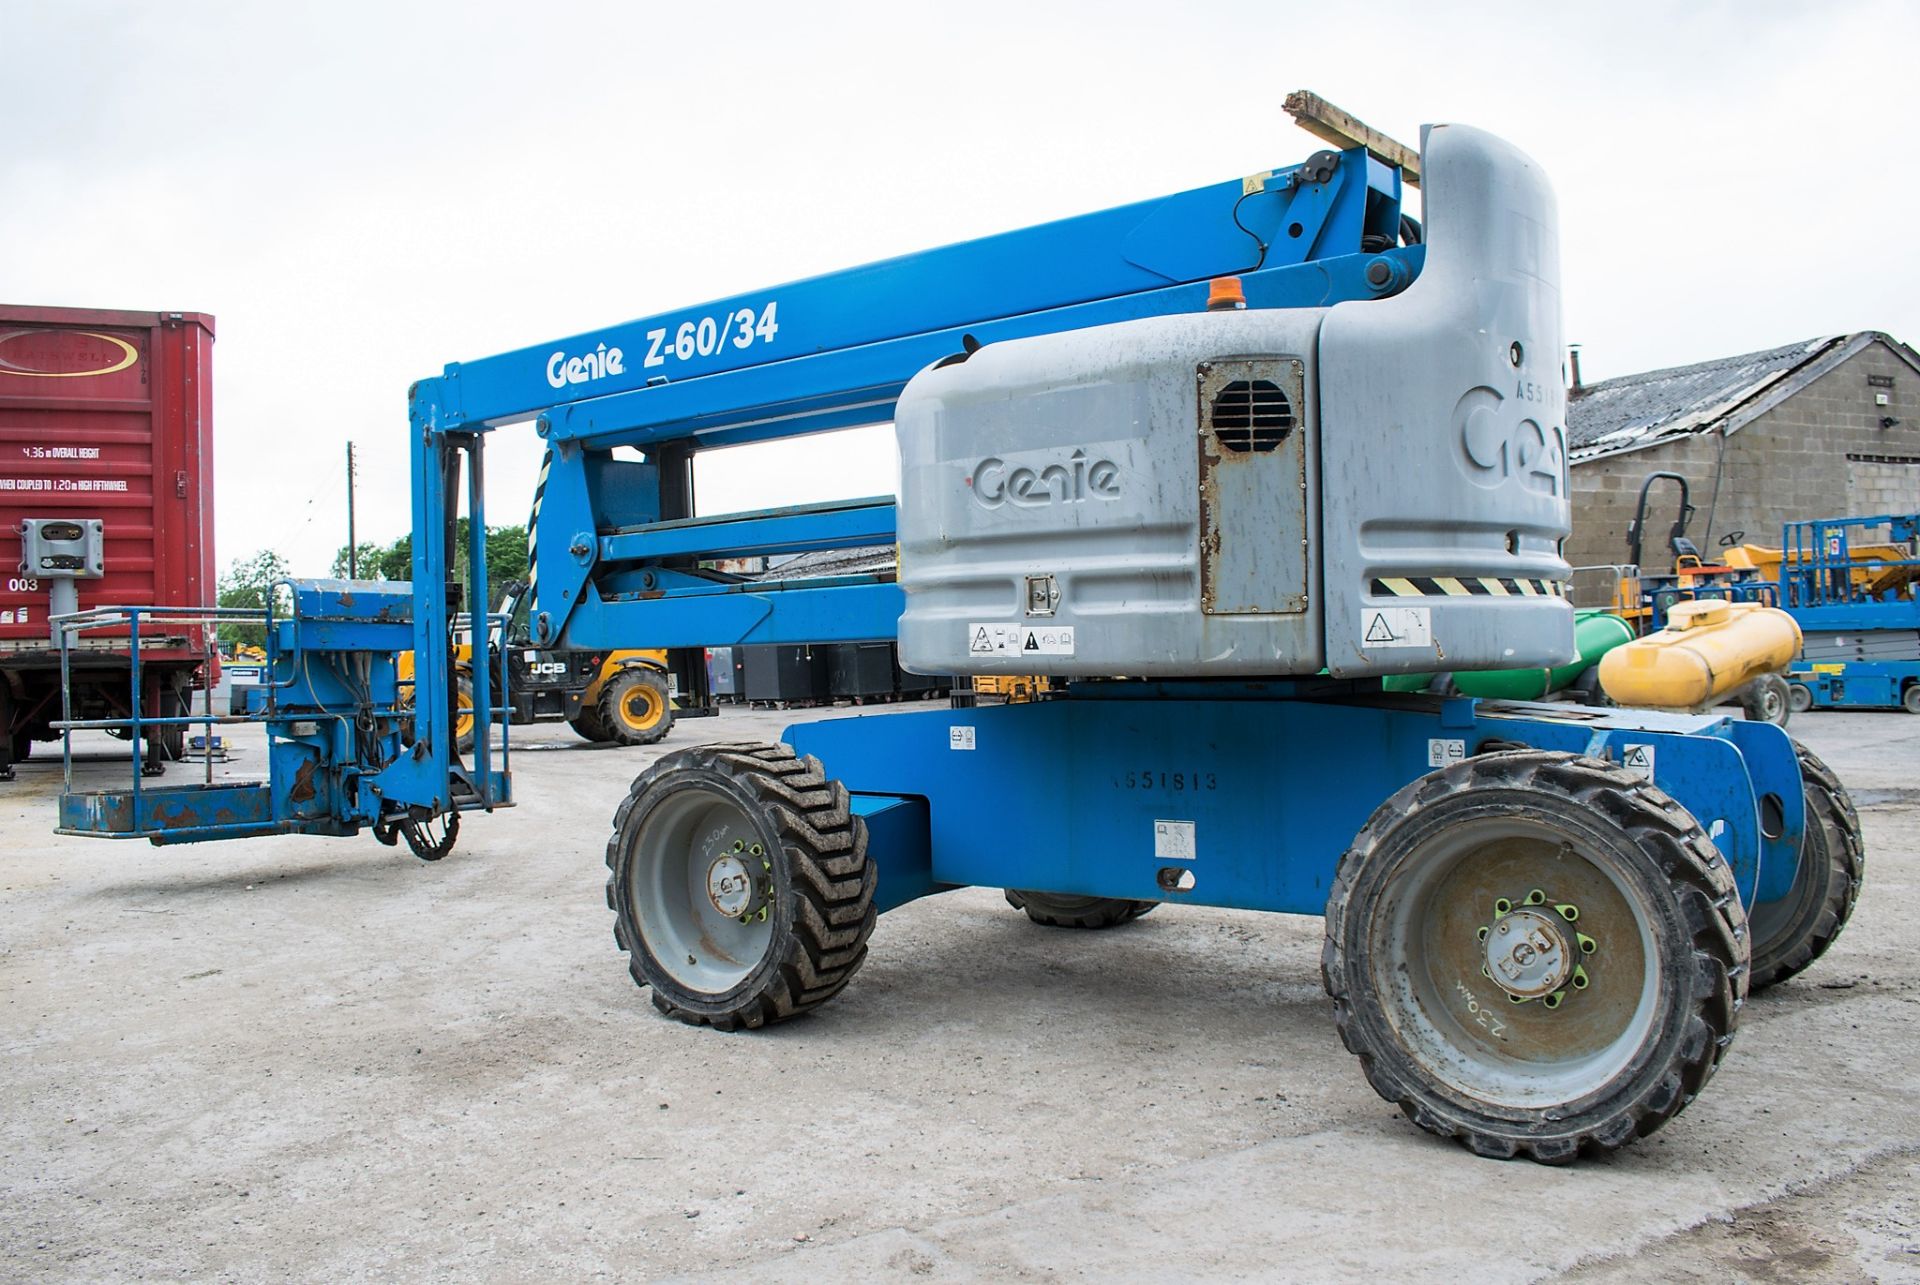 Genie Z-60-34 60 ft diesel driven 4x4 articulated boom lift access platform Year: 2011 S/N: 10173 - Image 3 of 13